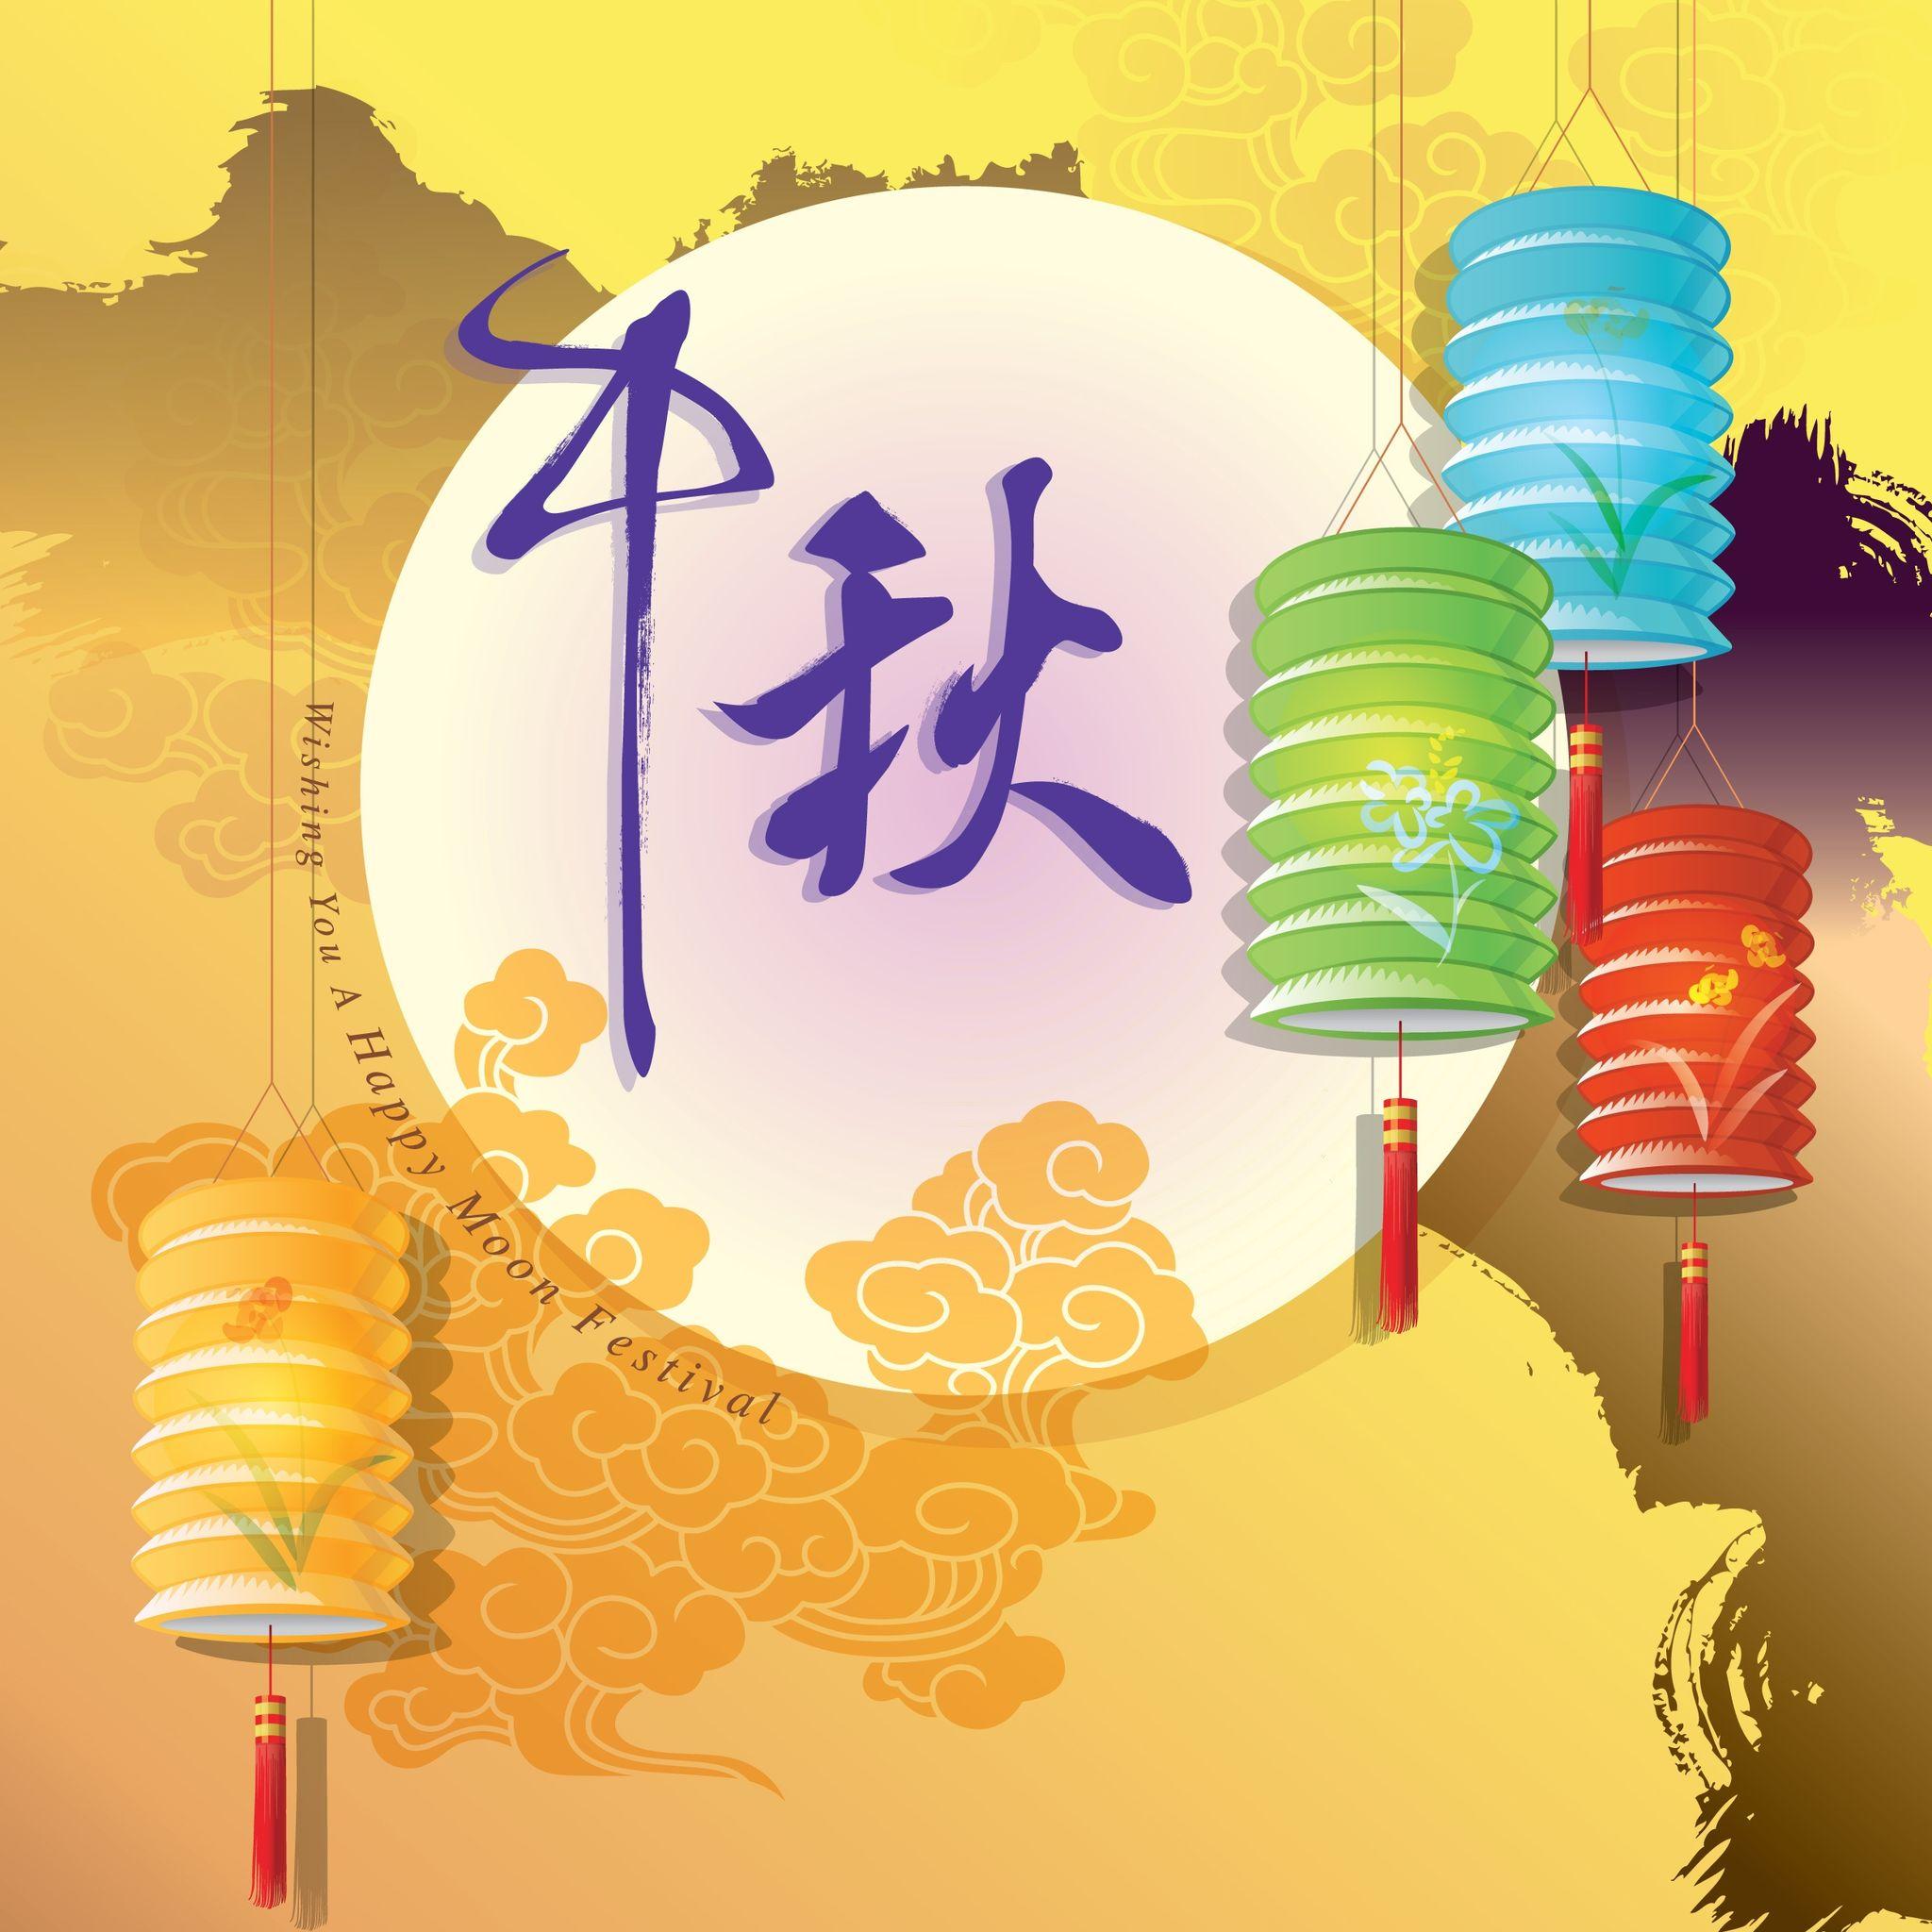 Cool Wallpaper Android Mid Autumn Festival. Wallpaper HD